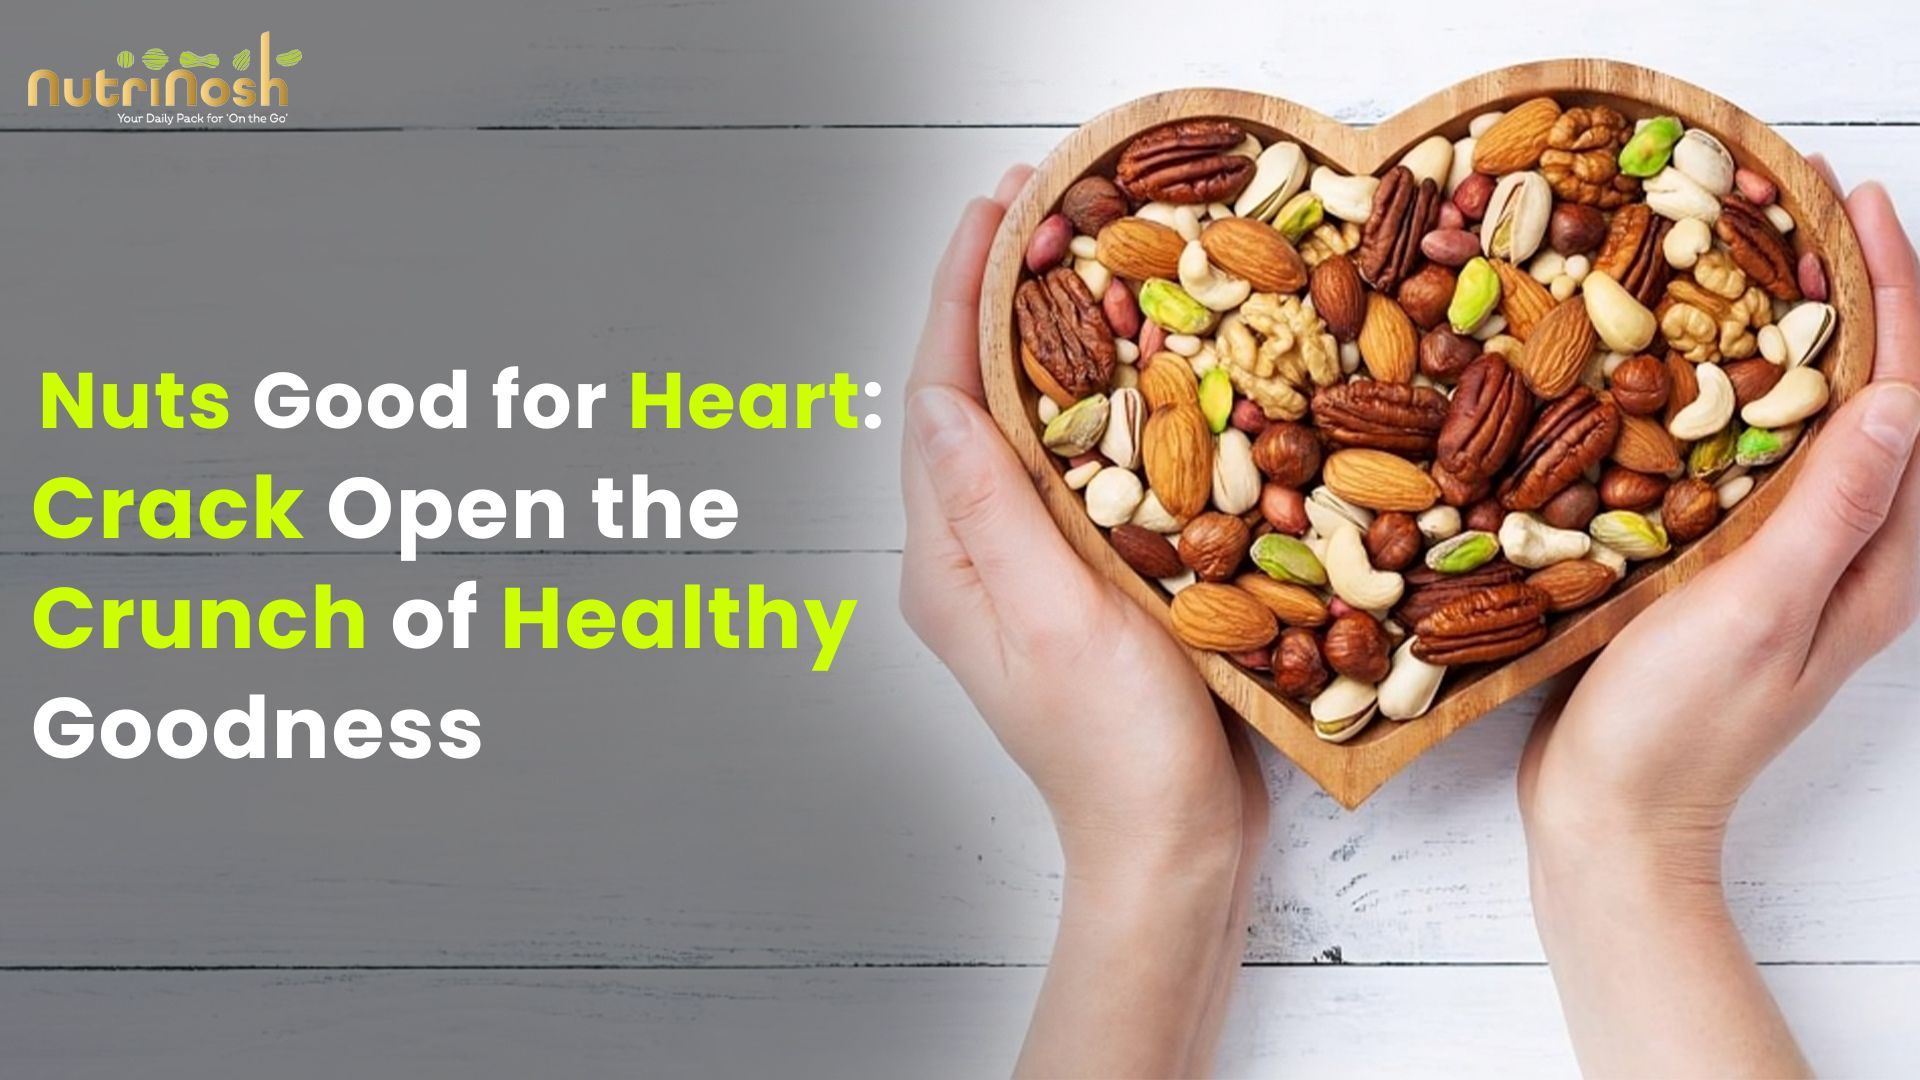 Nuts Good for Heart: Crack Open the Crunch of Healthy Goodness